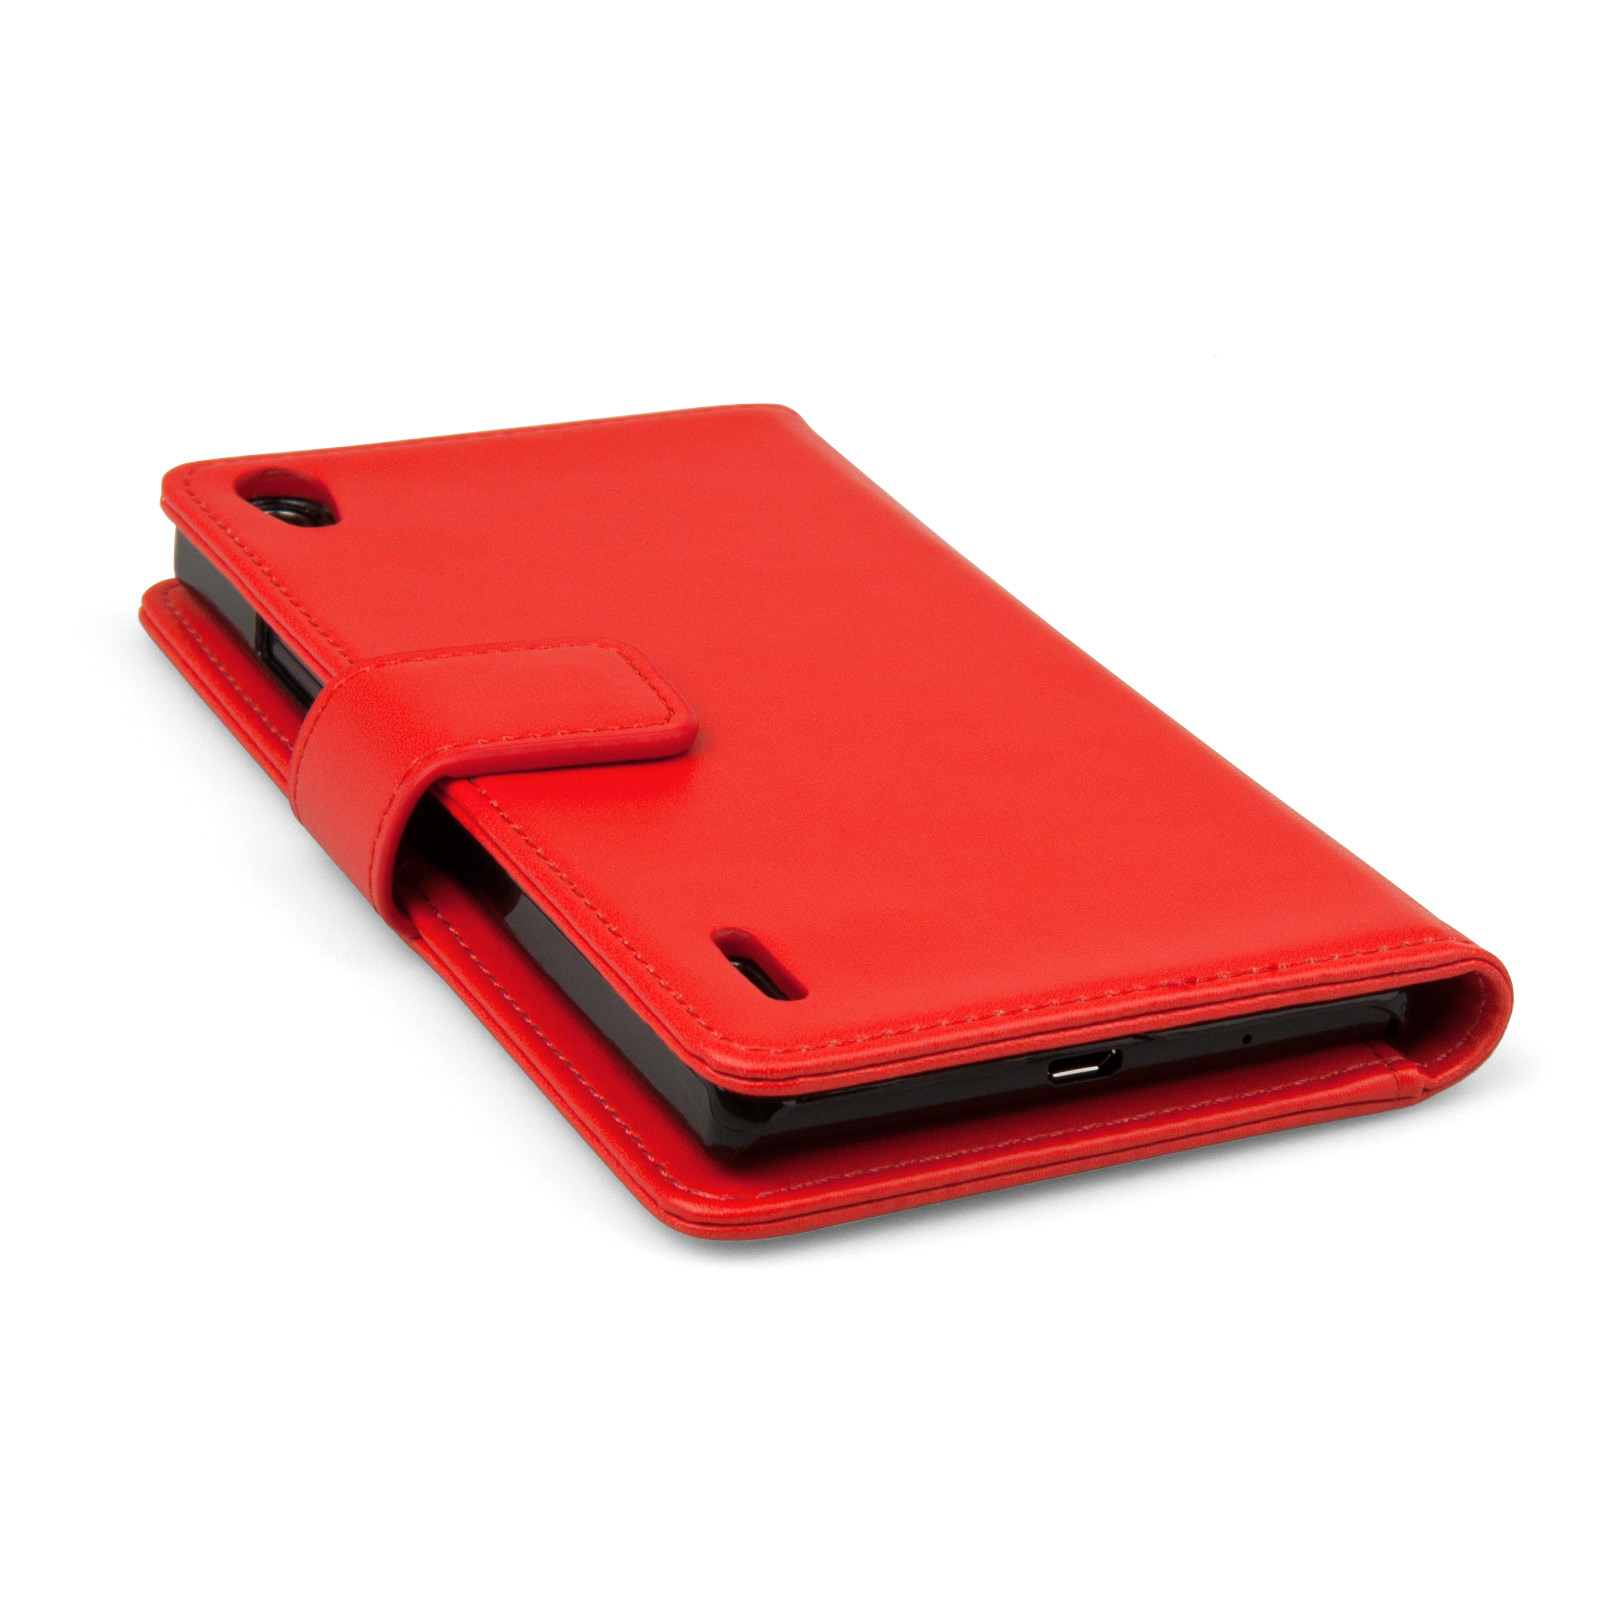 YouSave Accessories Huawei Ascend P7 Leather-Effect Wallet Case - Red